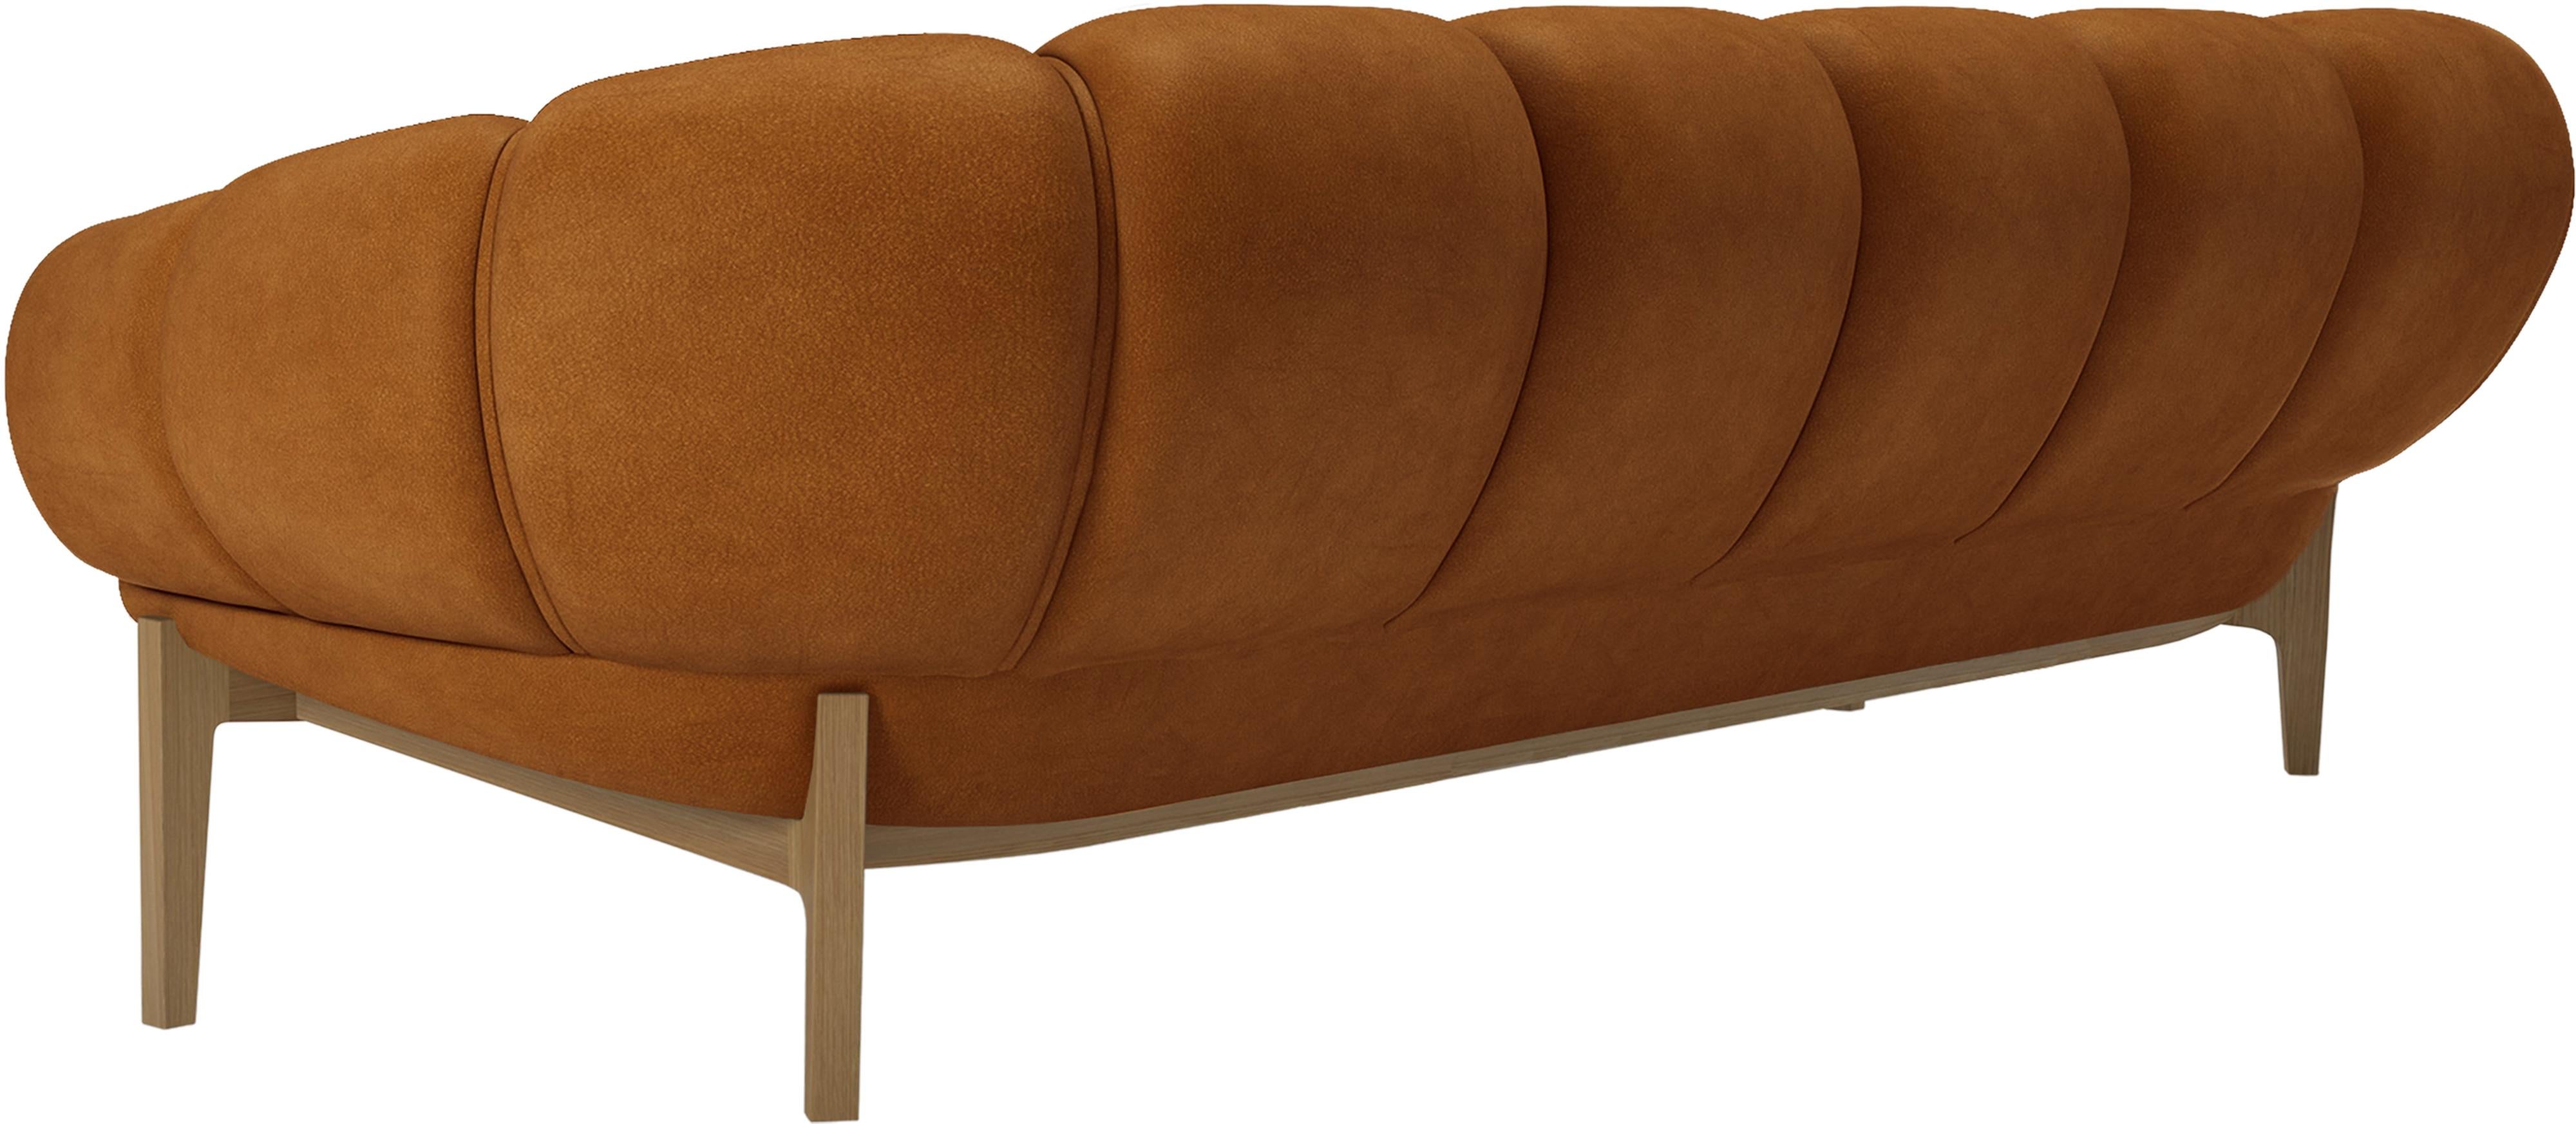 Leather 'Croissant' Sofa by Illum Wikkelsø for Gubi with Walnut Legs For Sale 8